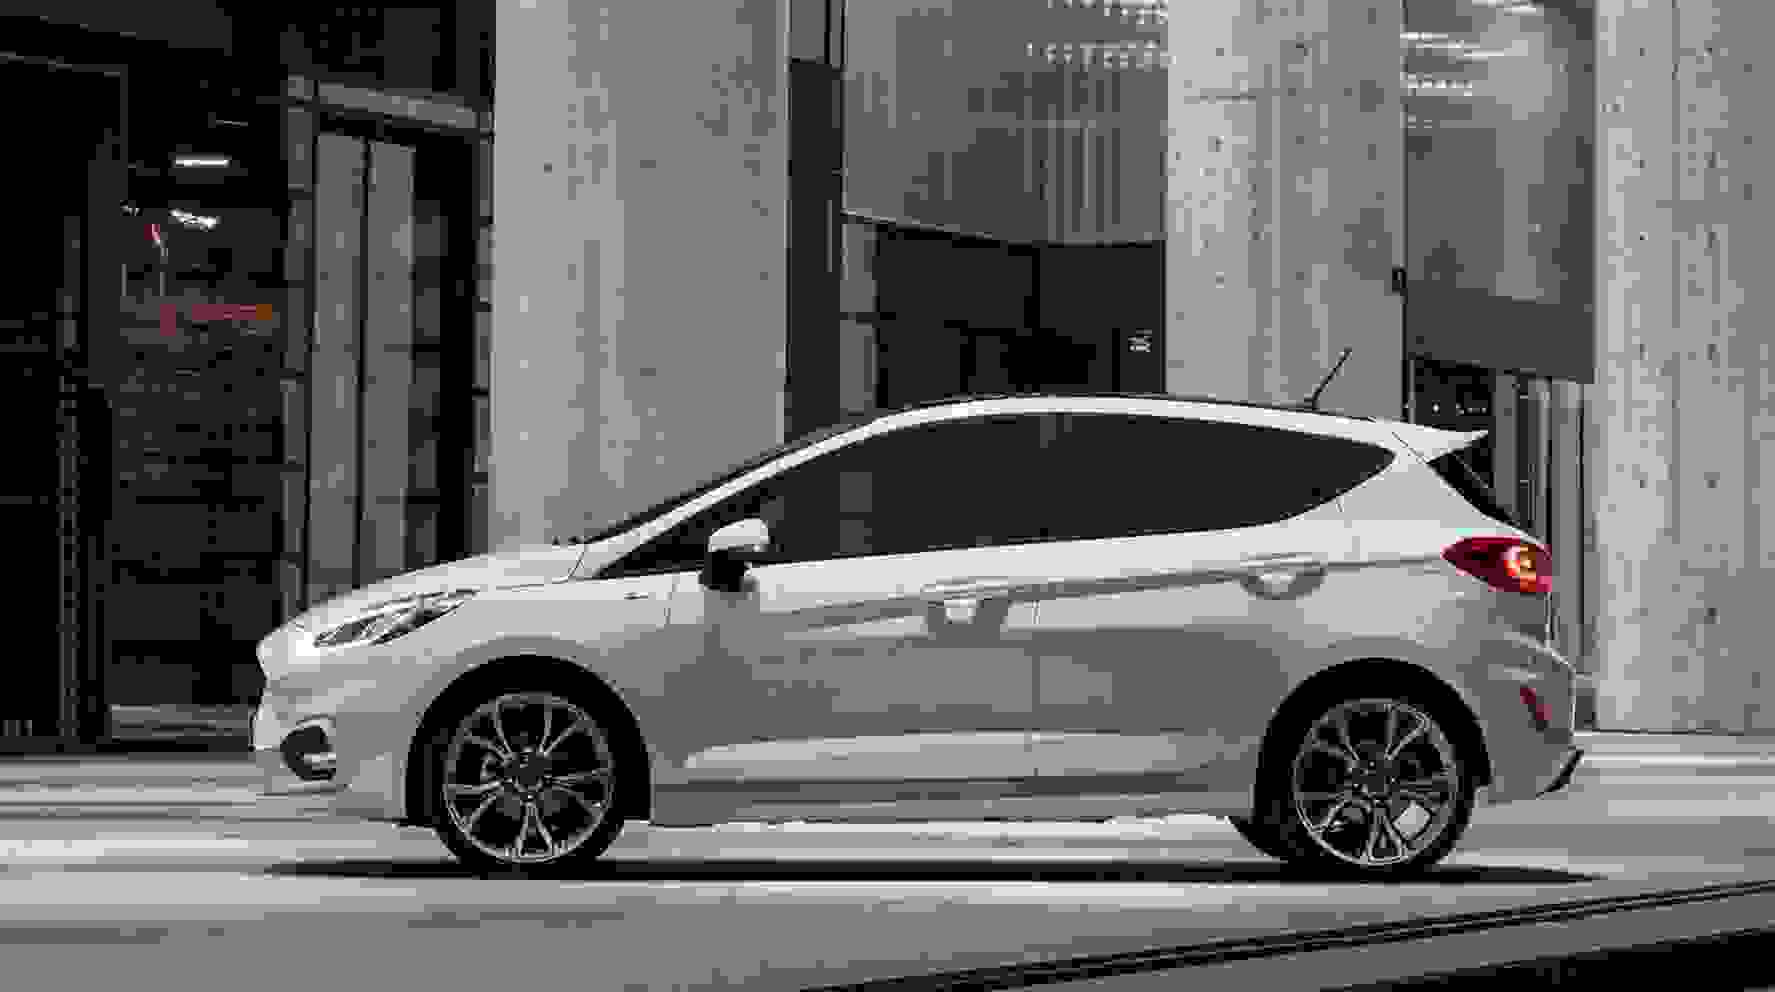 New Ford Fiesta England, Nationwide Hartwell